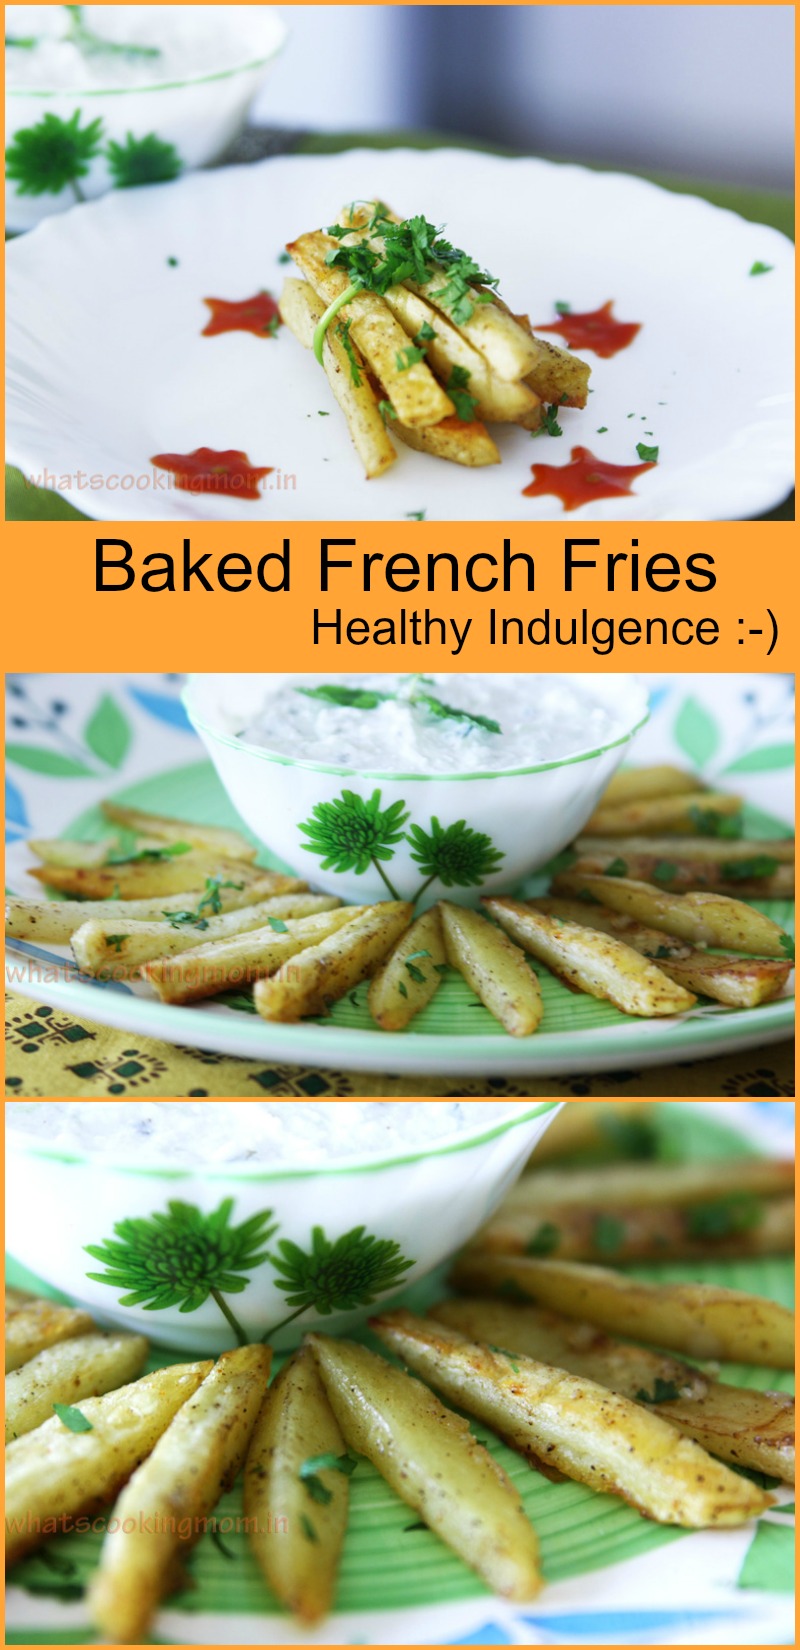 Oven Baked French Fries - healthy Indulgence, snack, appetizers, vegetarian, healthy